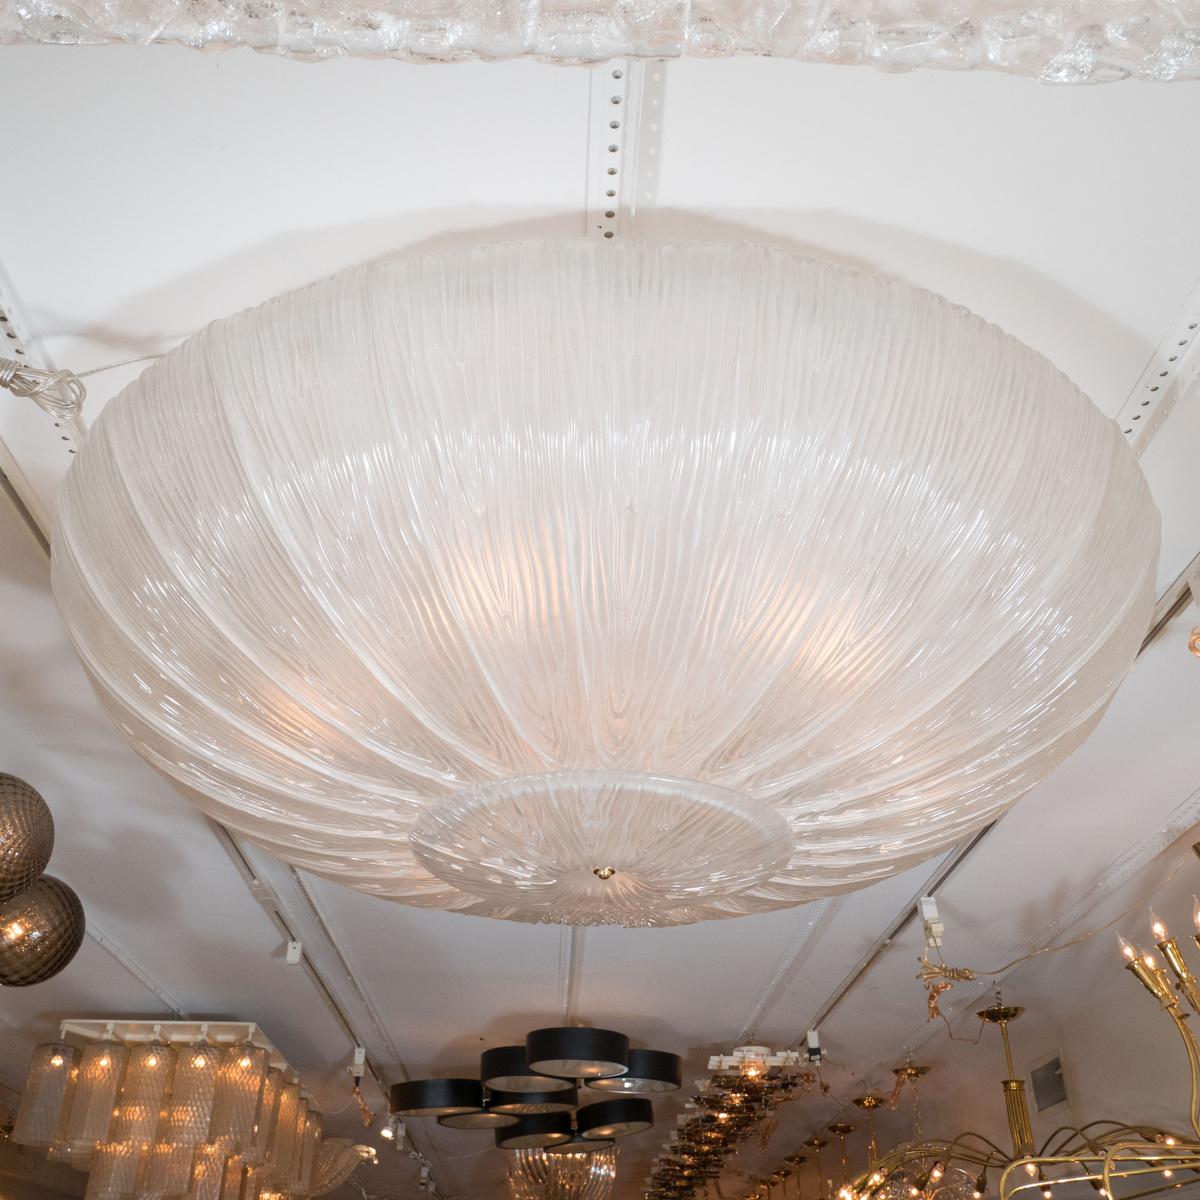 Large circular textured fluted glass ceiling fixture.